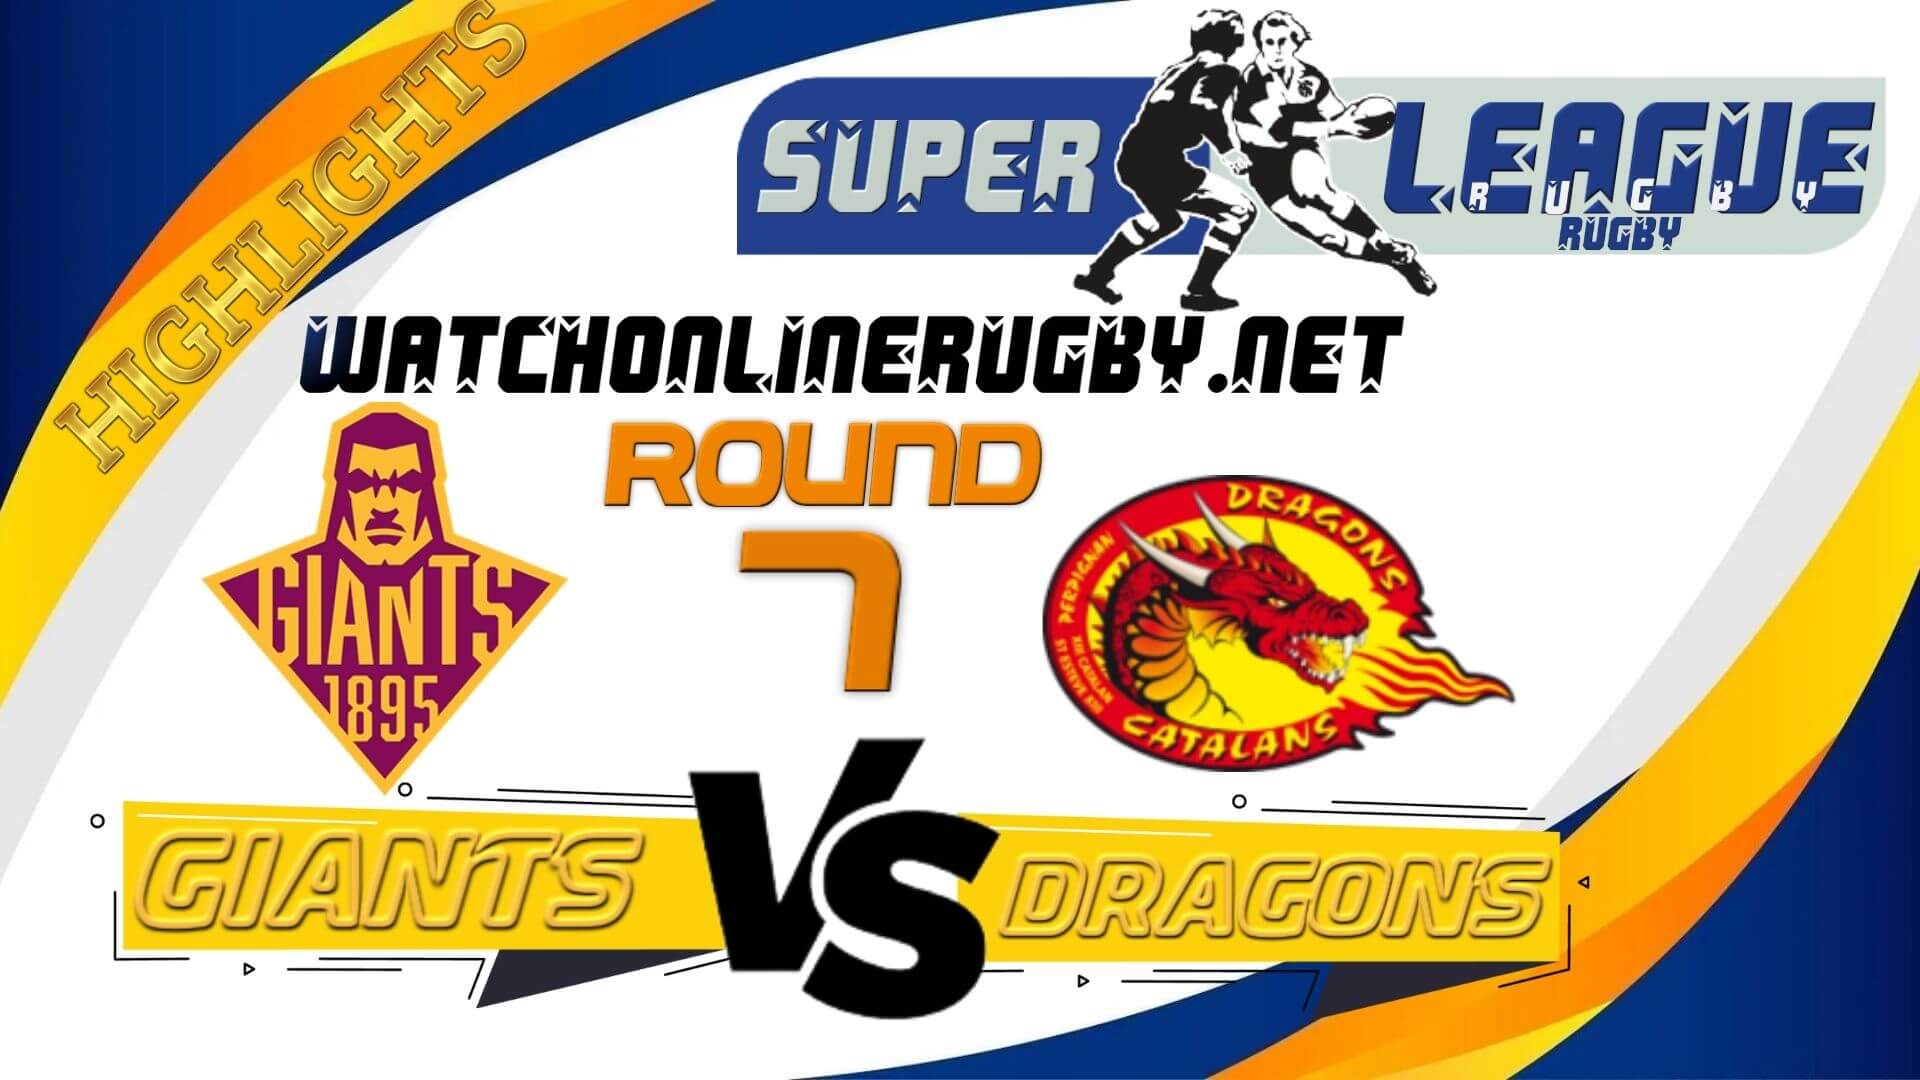 Huddersfield Giants Vs Catalans Dragons Super League Rugby 2022 RD 7